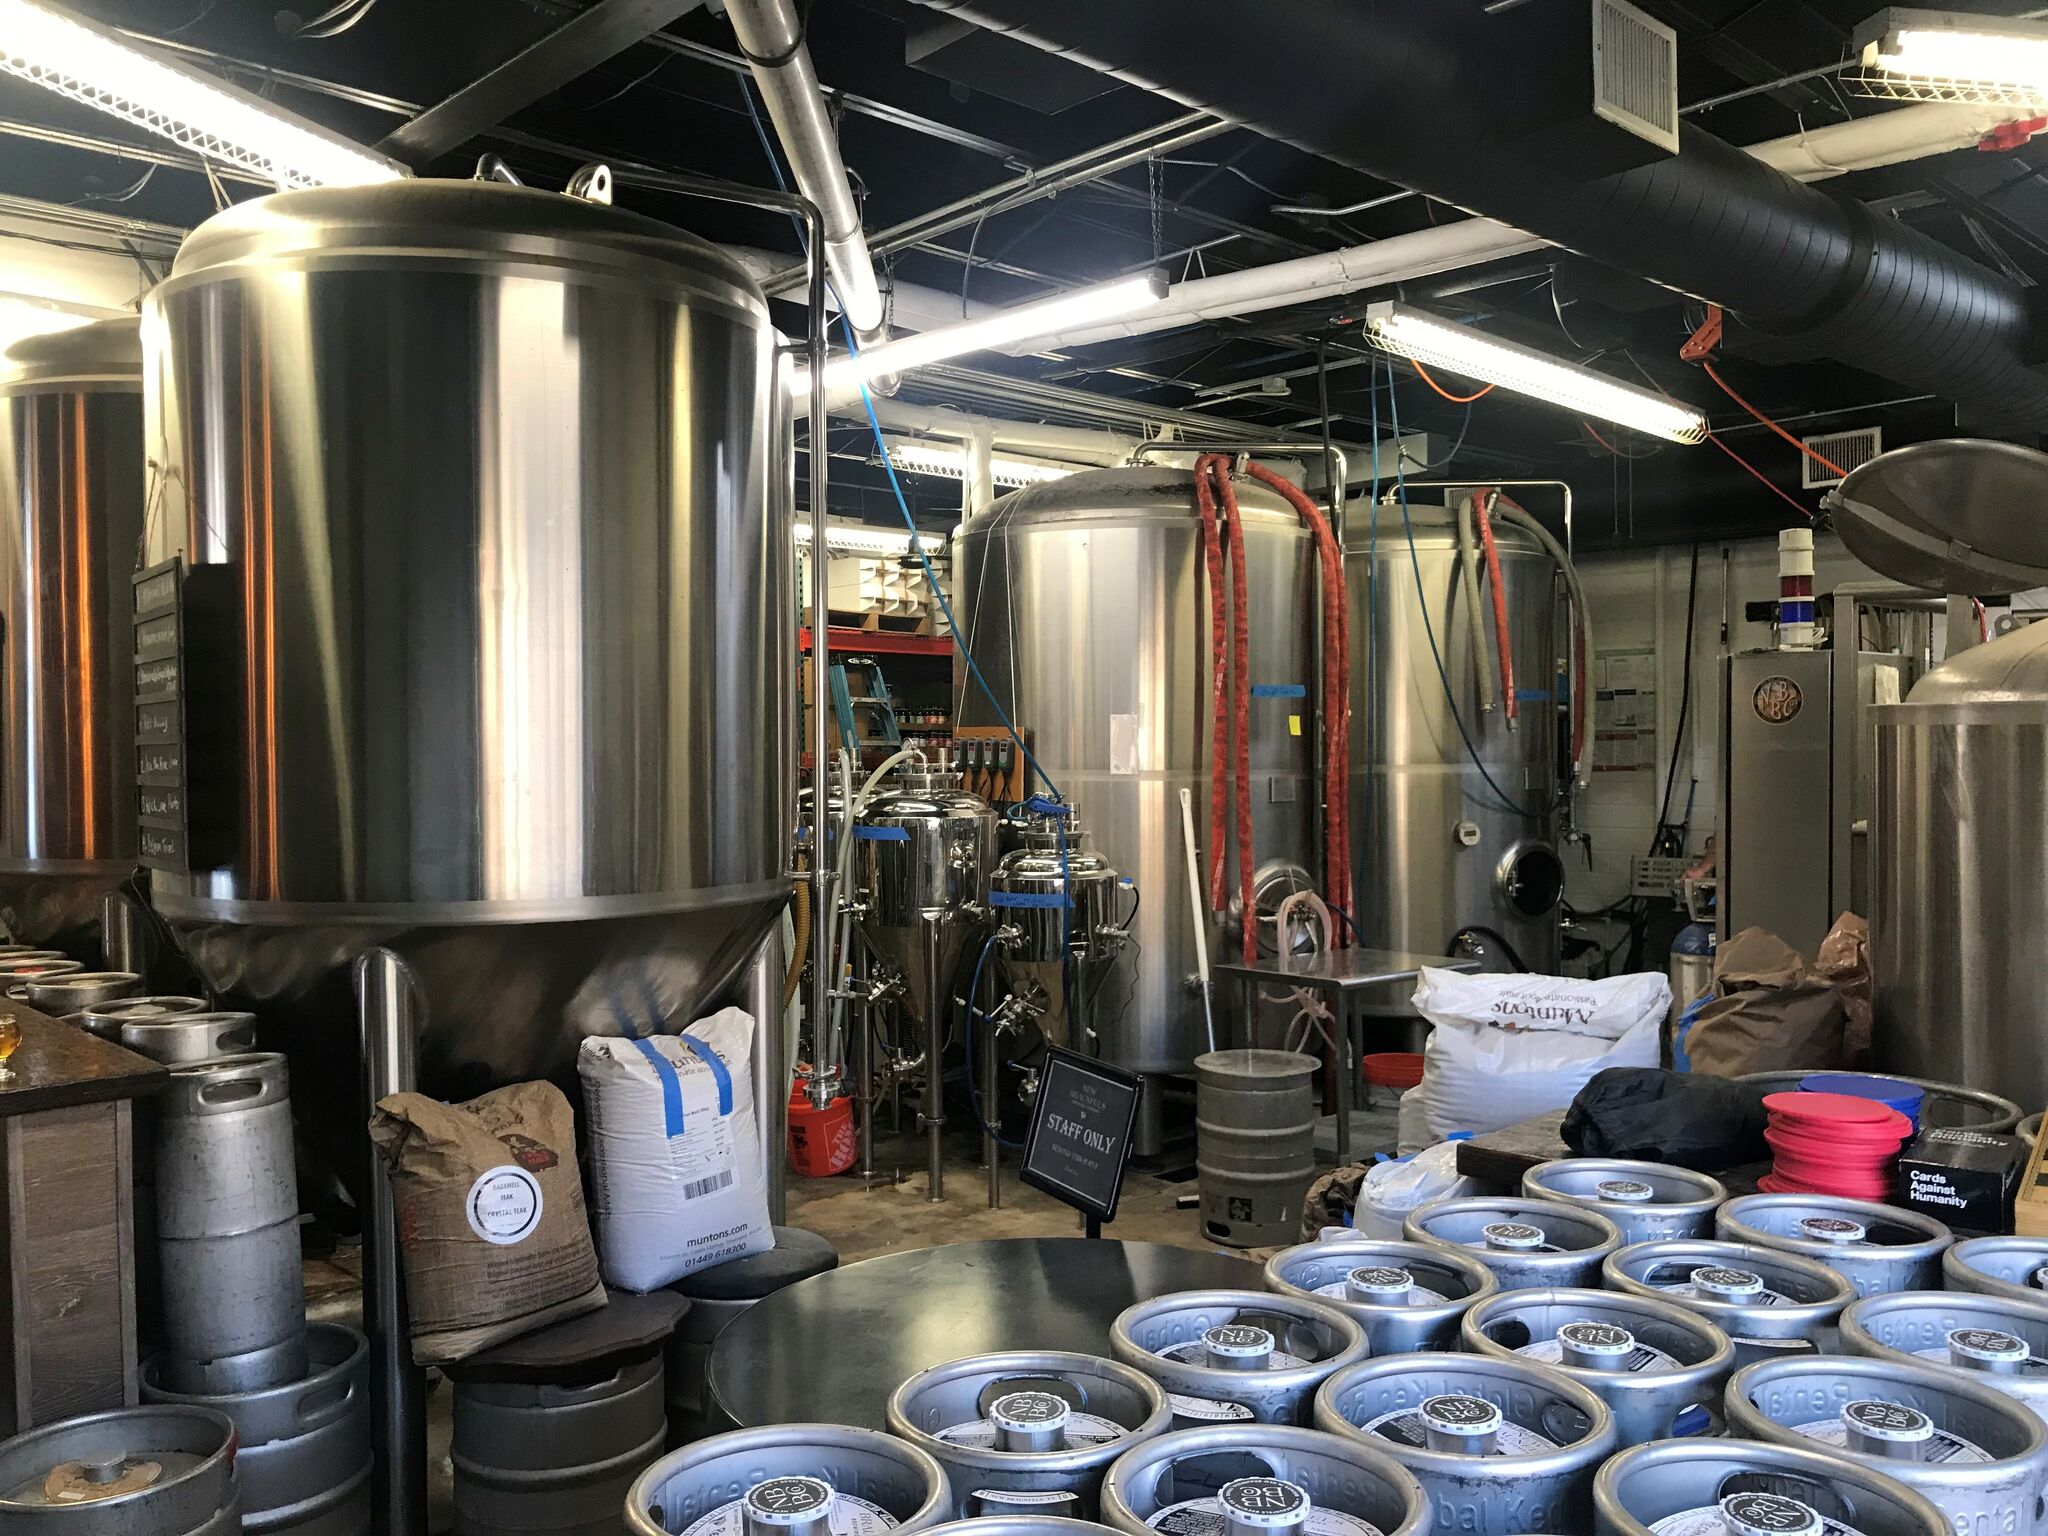 New Braunfels breweries to check out before the Hill Country Craft Beer